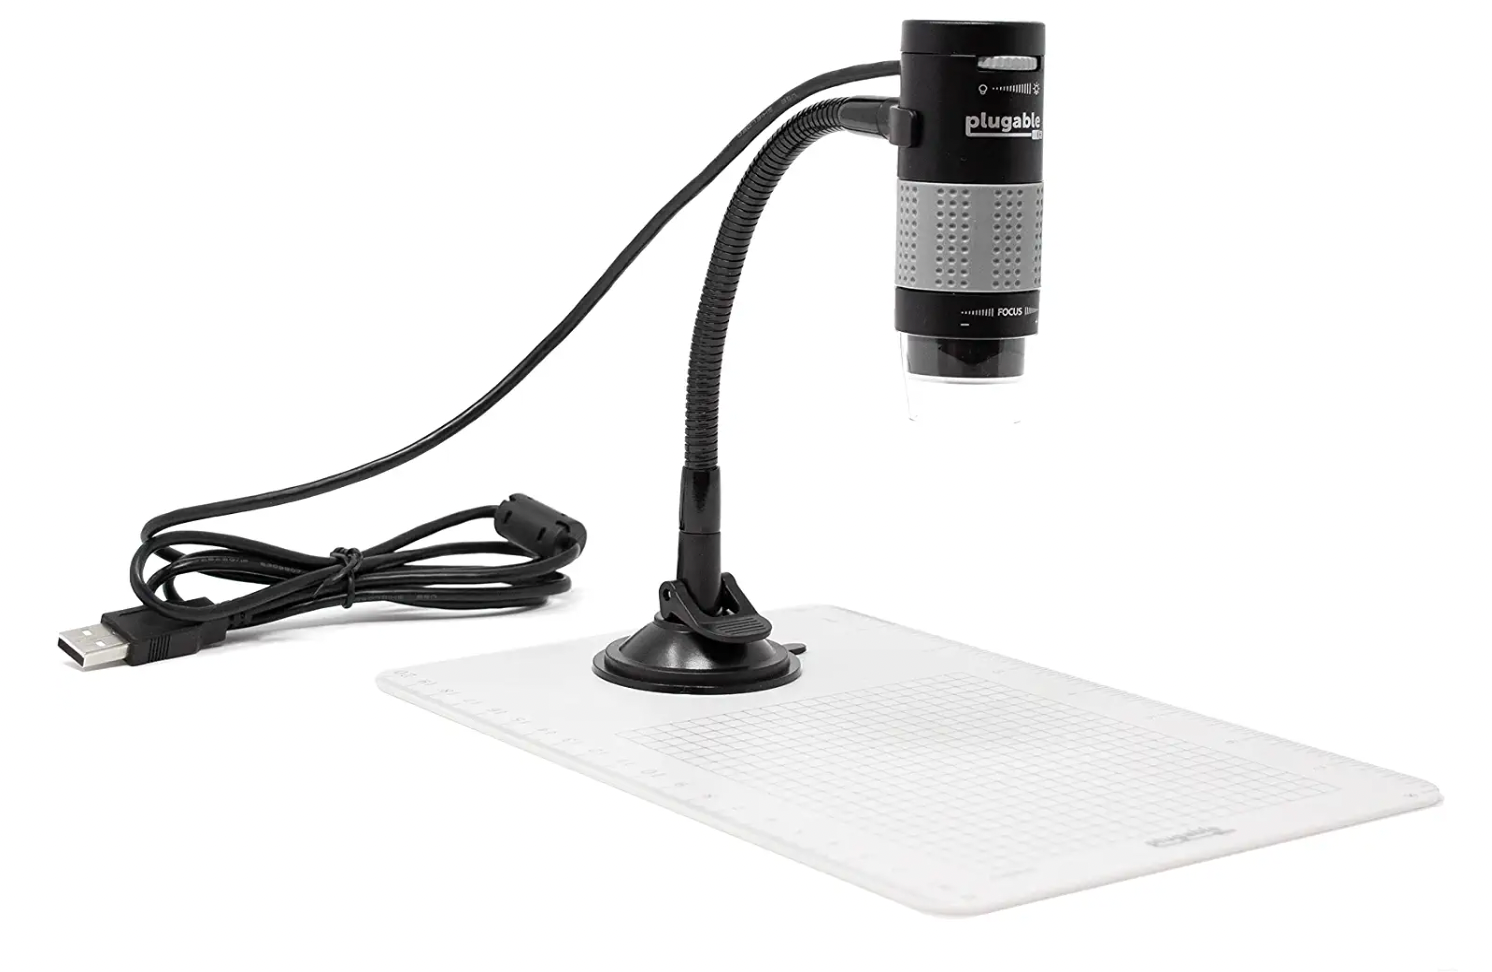 An image of the Plugable Digital USB Microscope with cable